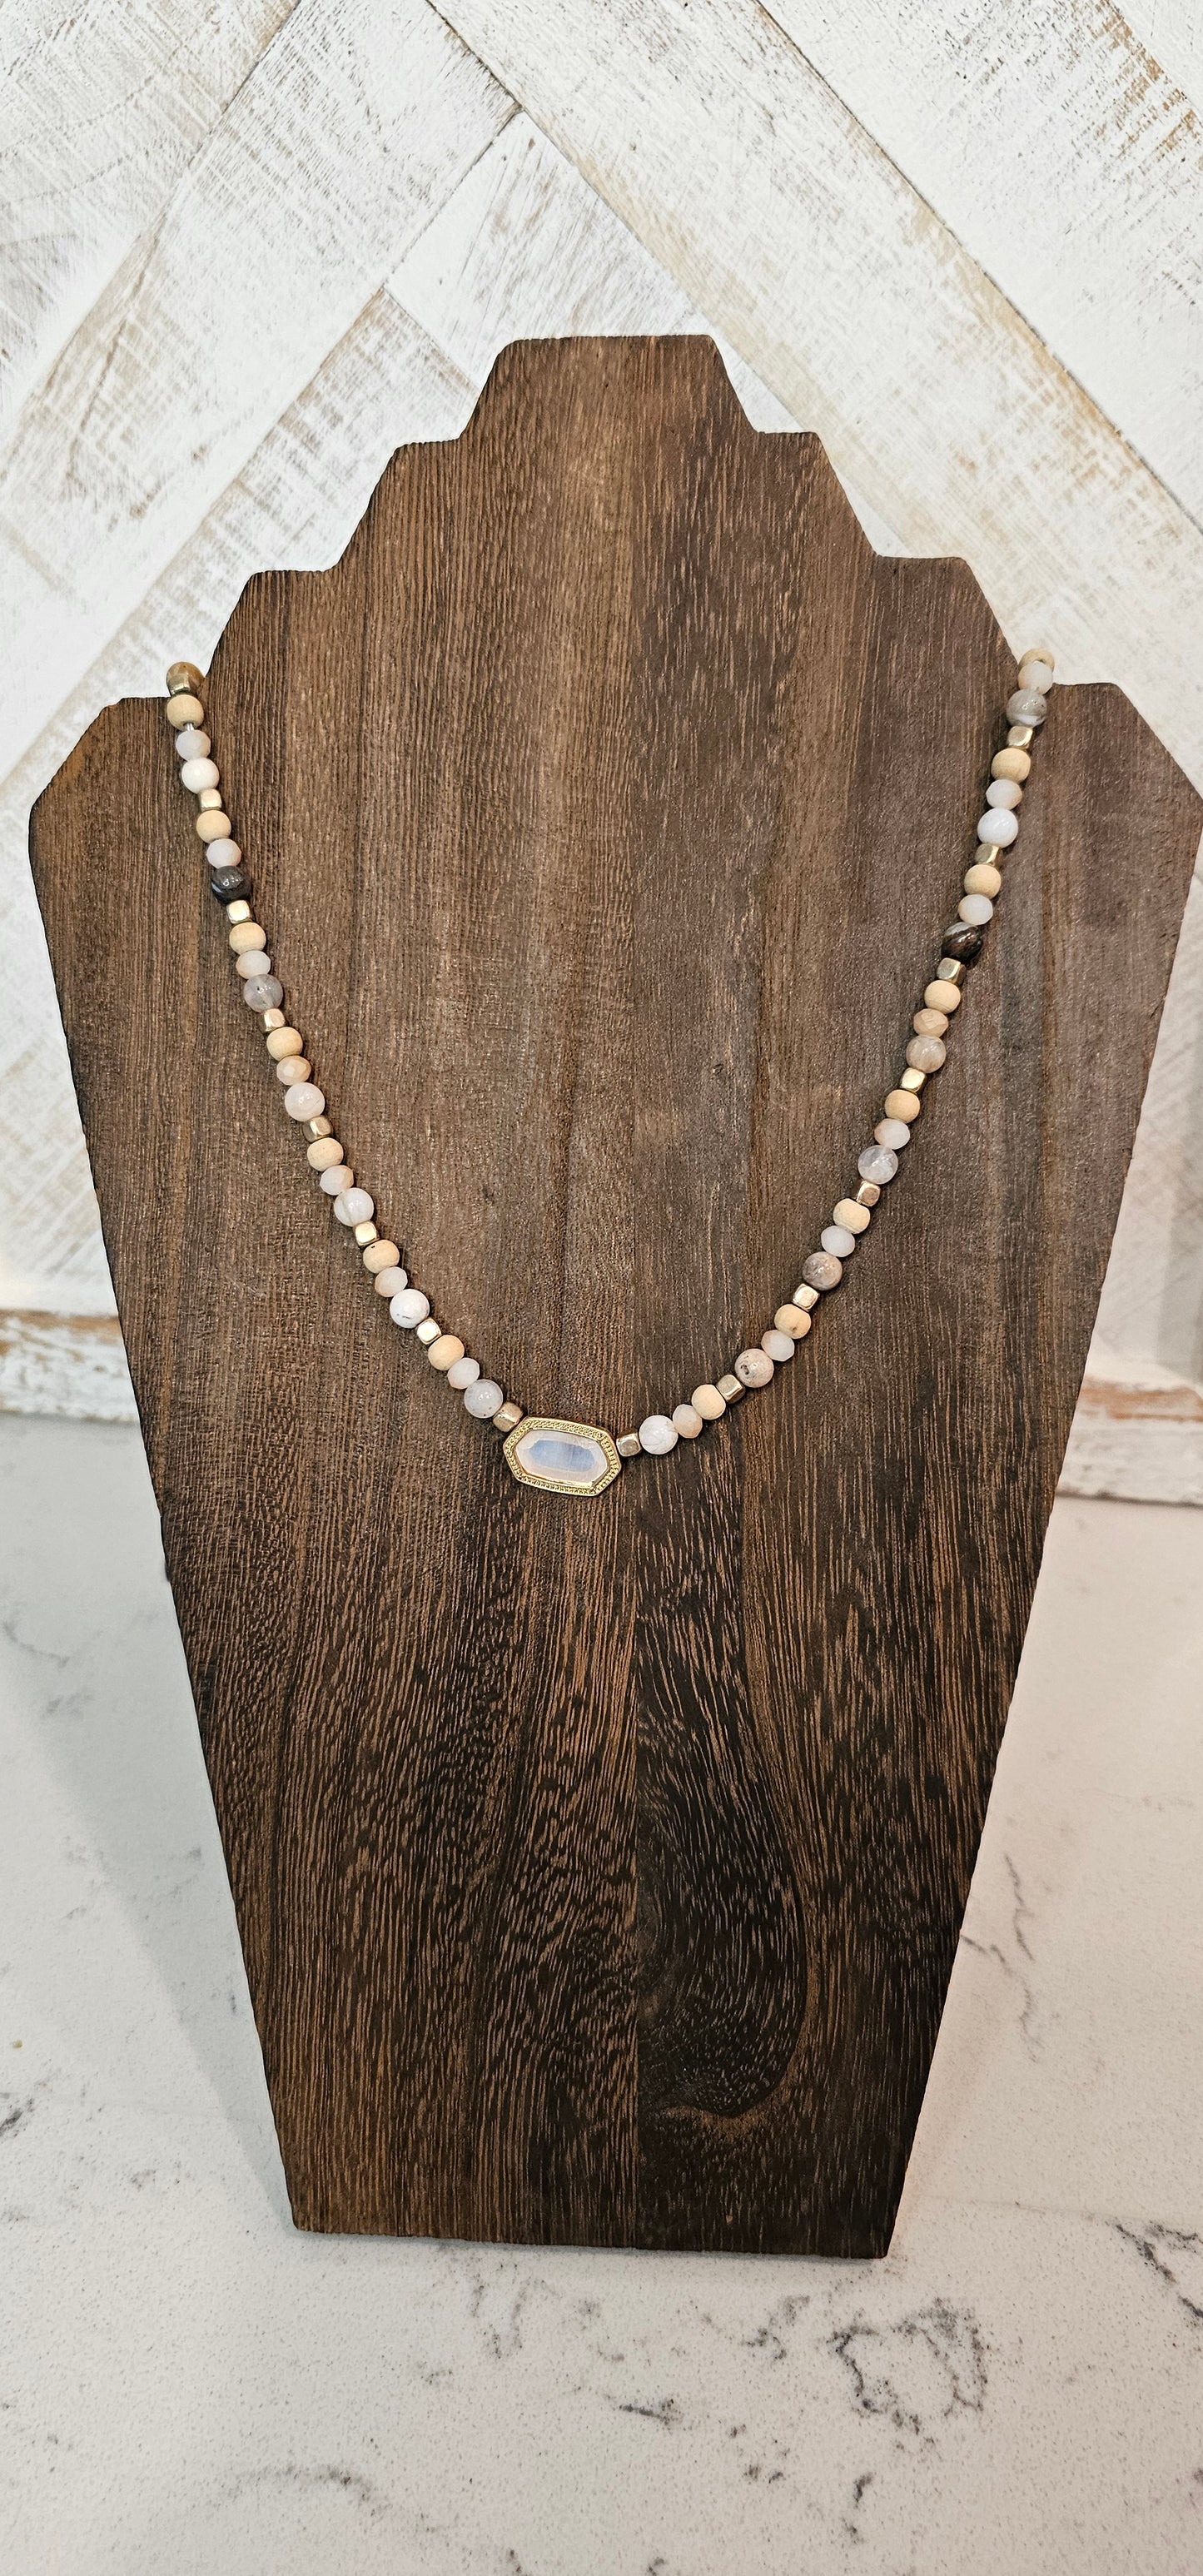 Adjustable Color: Gold chain, natural color beads & stones Limited supply!